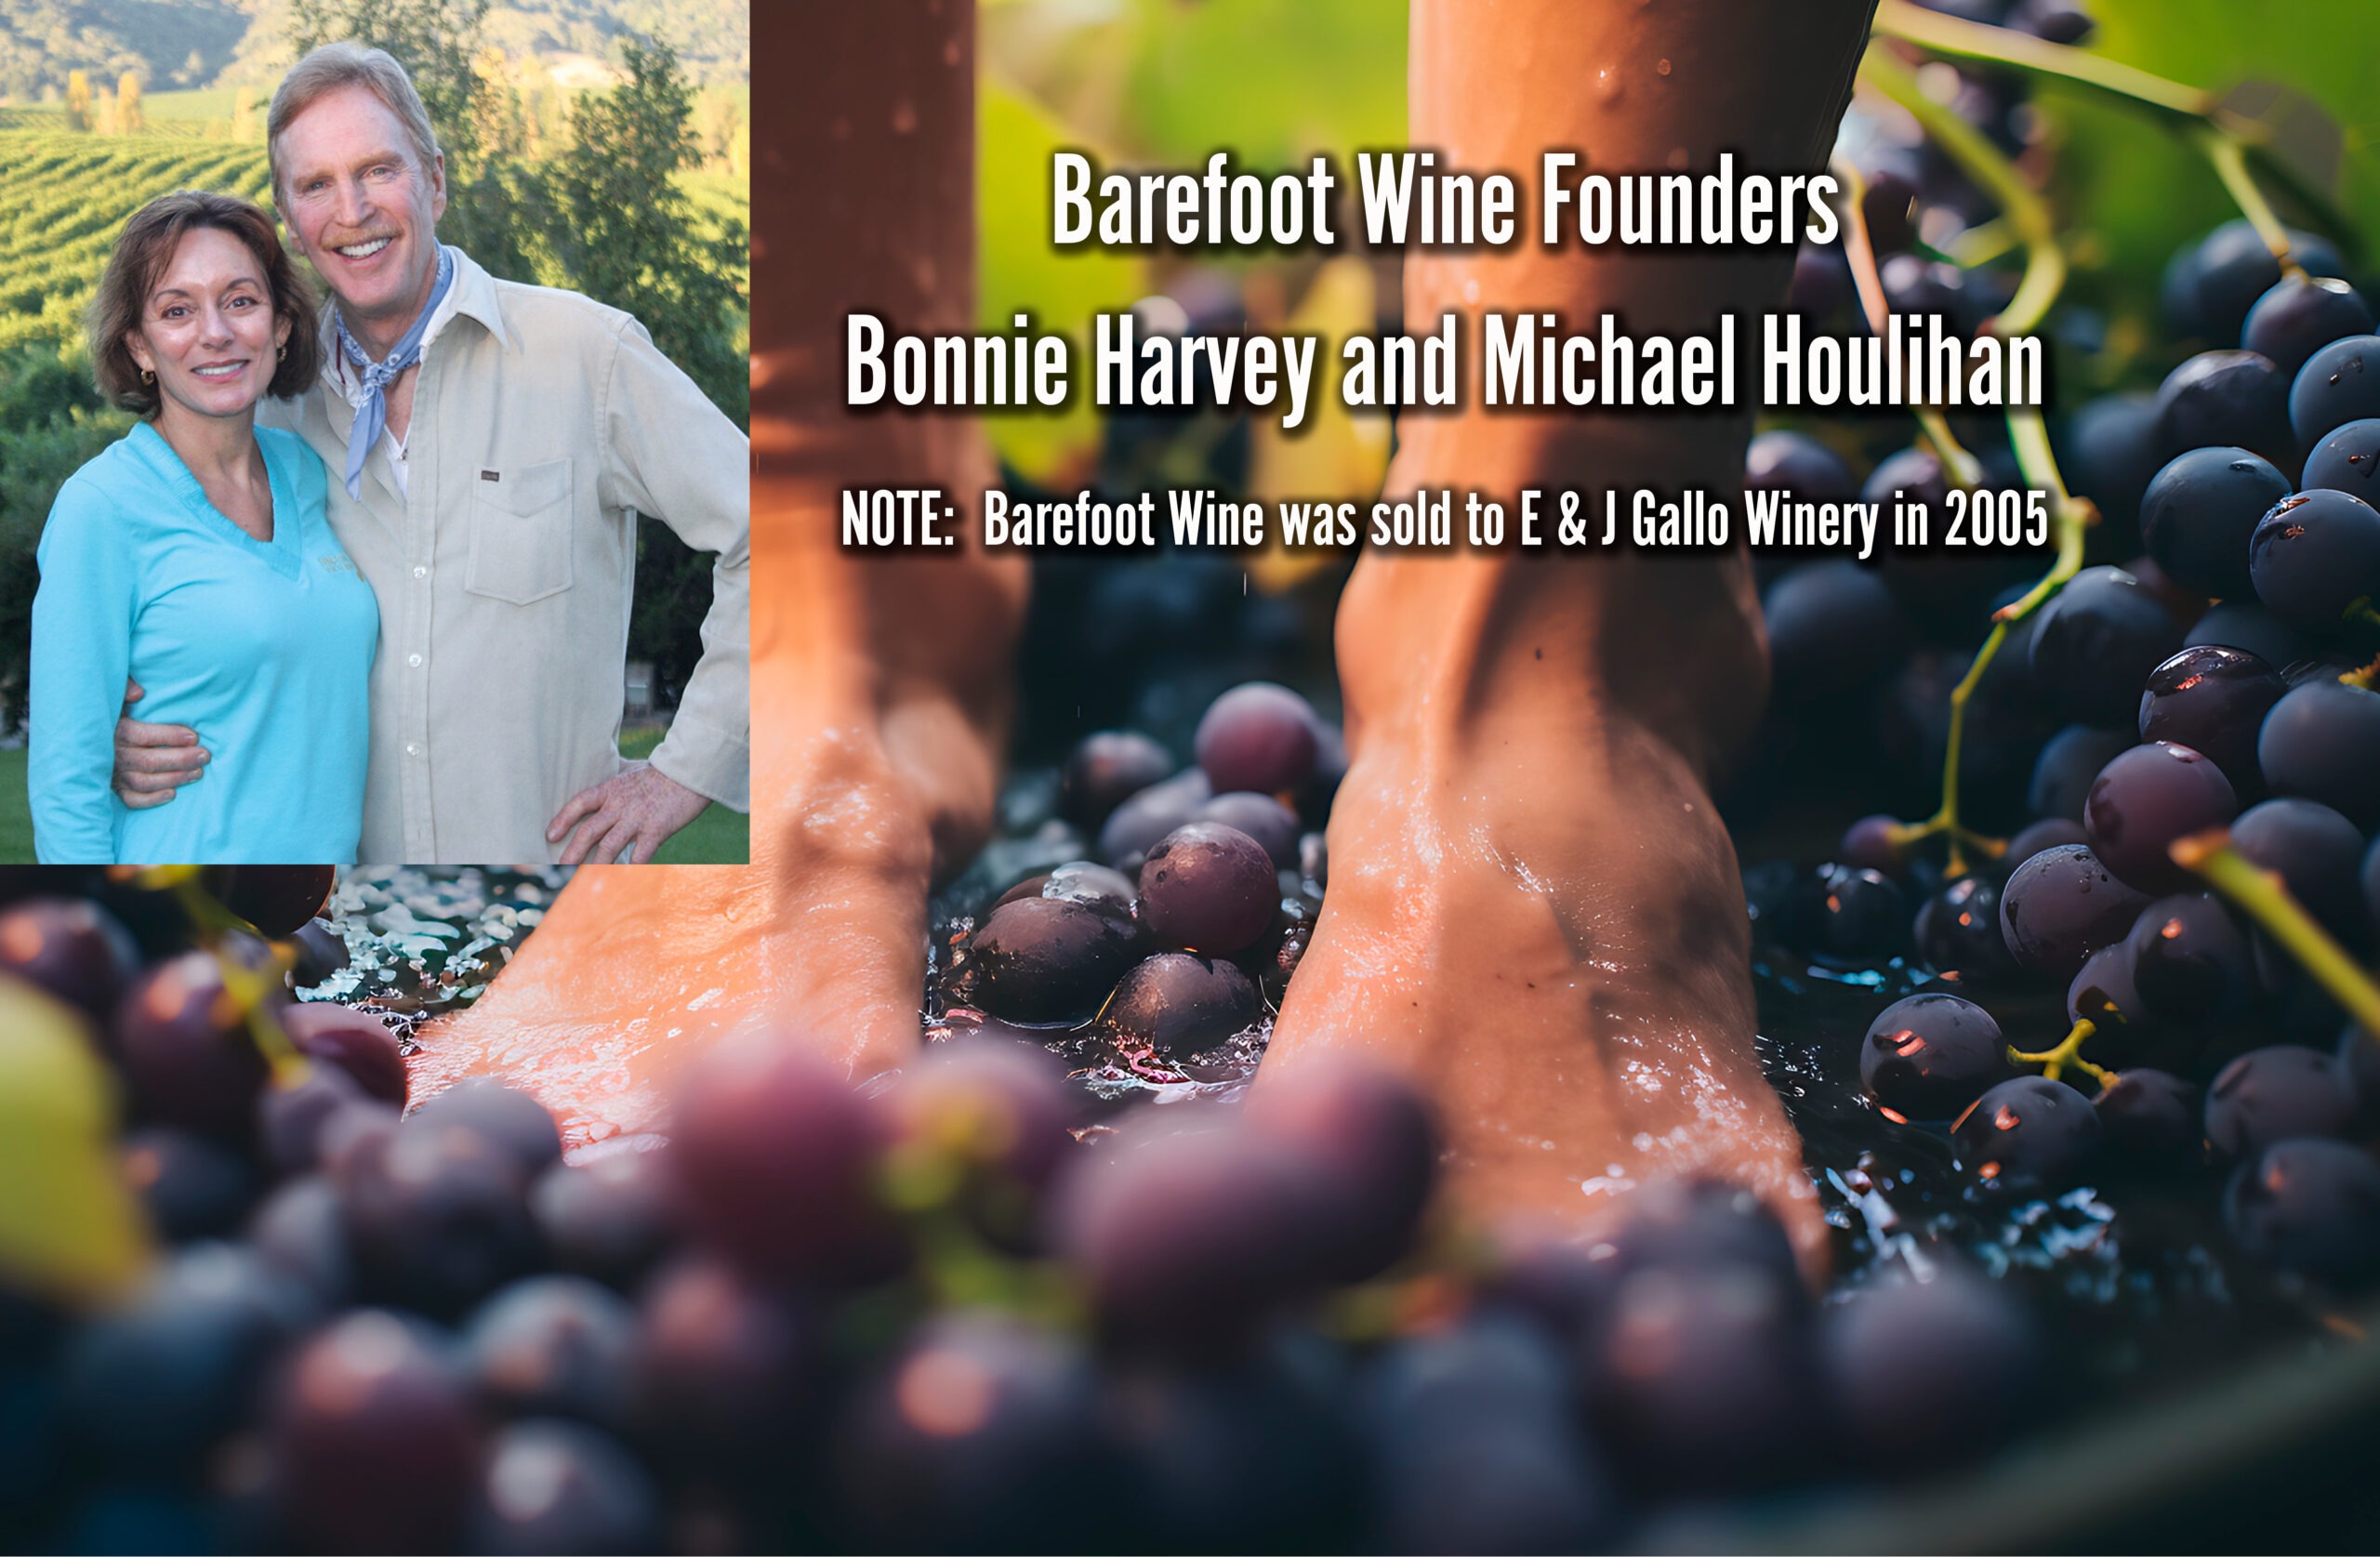 Episode #775 – David’s Remarkable Conversation With Two Novices Who Conquered the Wine Industry in Their Bare Feet!